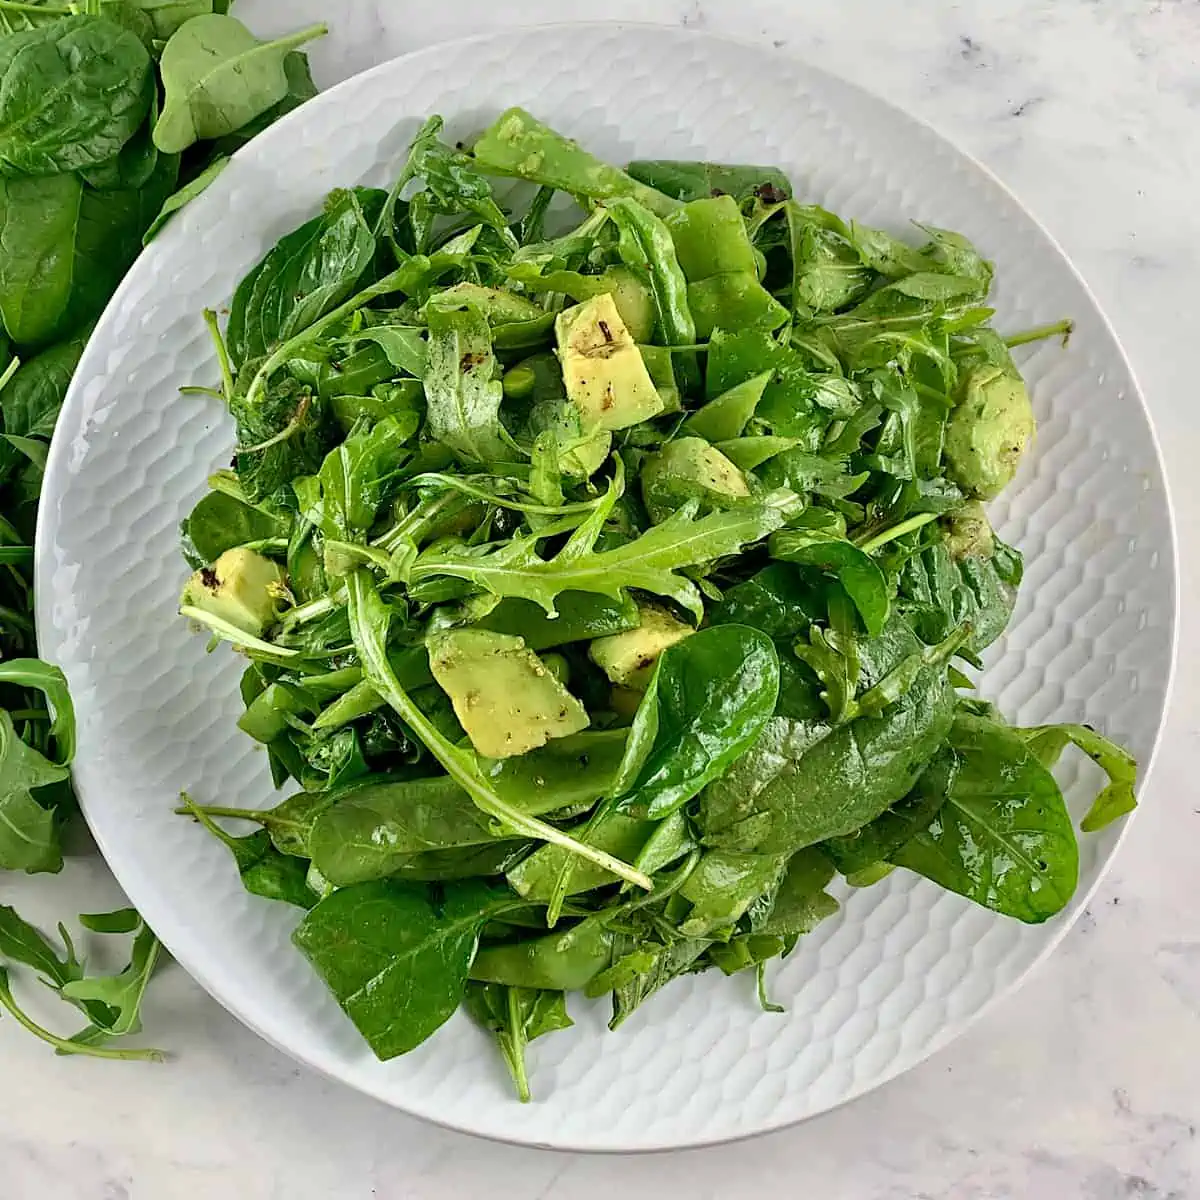 Spinach arugula salad on a white plate with greens scattered around.